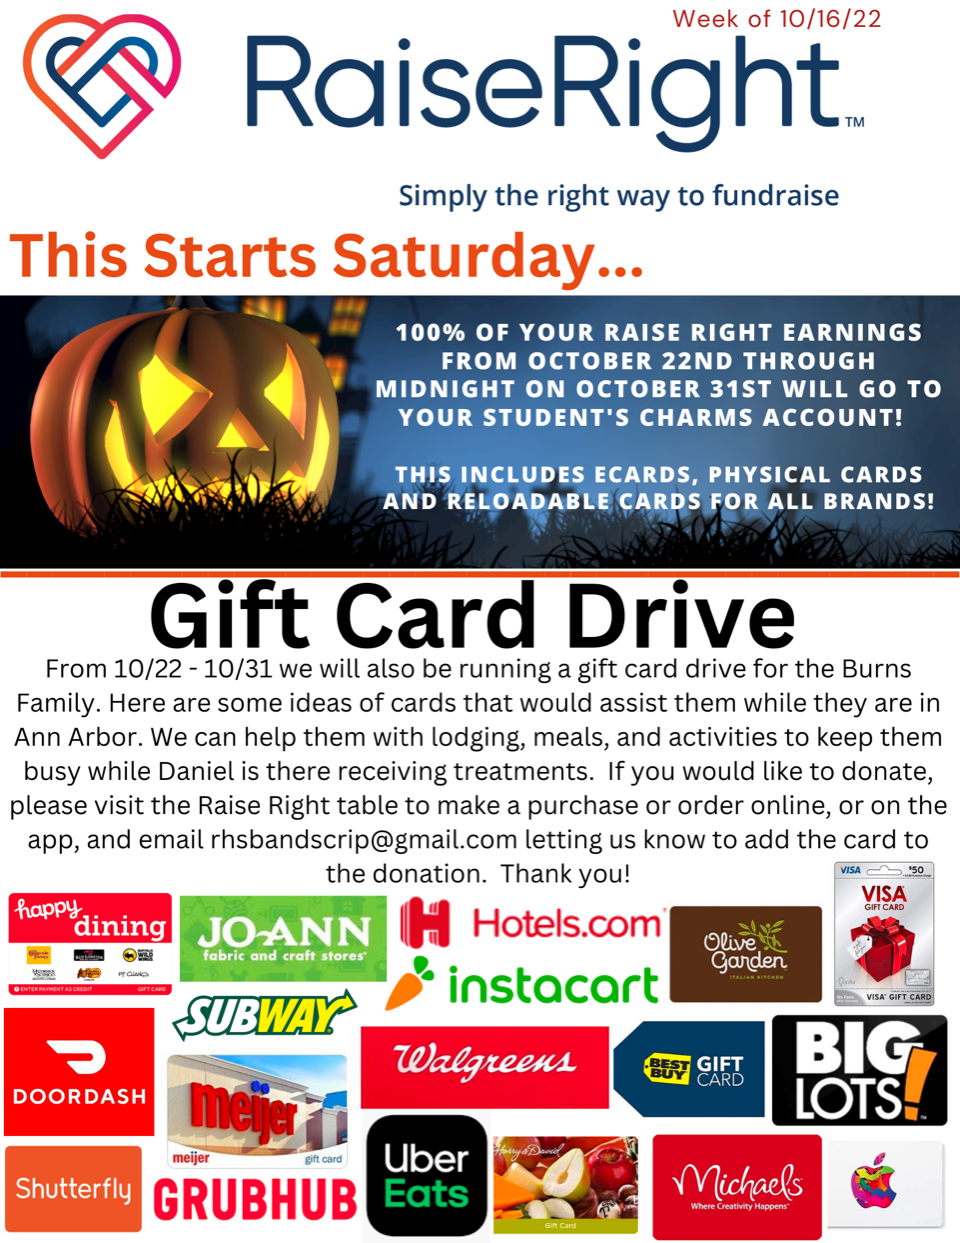 Gift Card Drive for TeamDaniel (the Burns Family) Rockford Bands